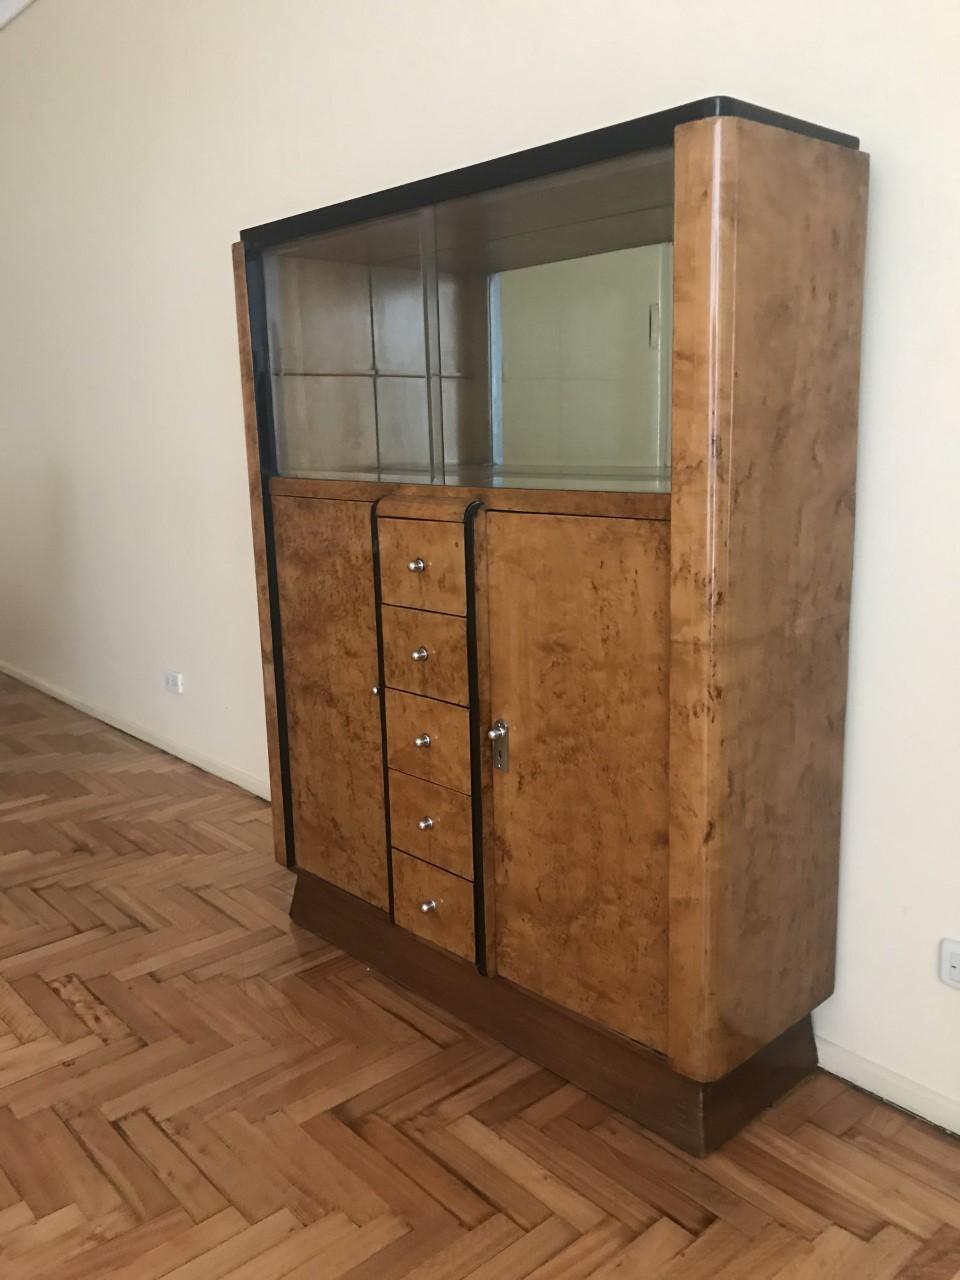 Furniture Art Deco

Material: wood, mirror and glass
Style: Art Deco
Country: France
We have specialized in the sale of Art Deco and Art Nouveau styles since 1982.

Art. Deco

The term was coined in the 1960s as such and came from the